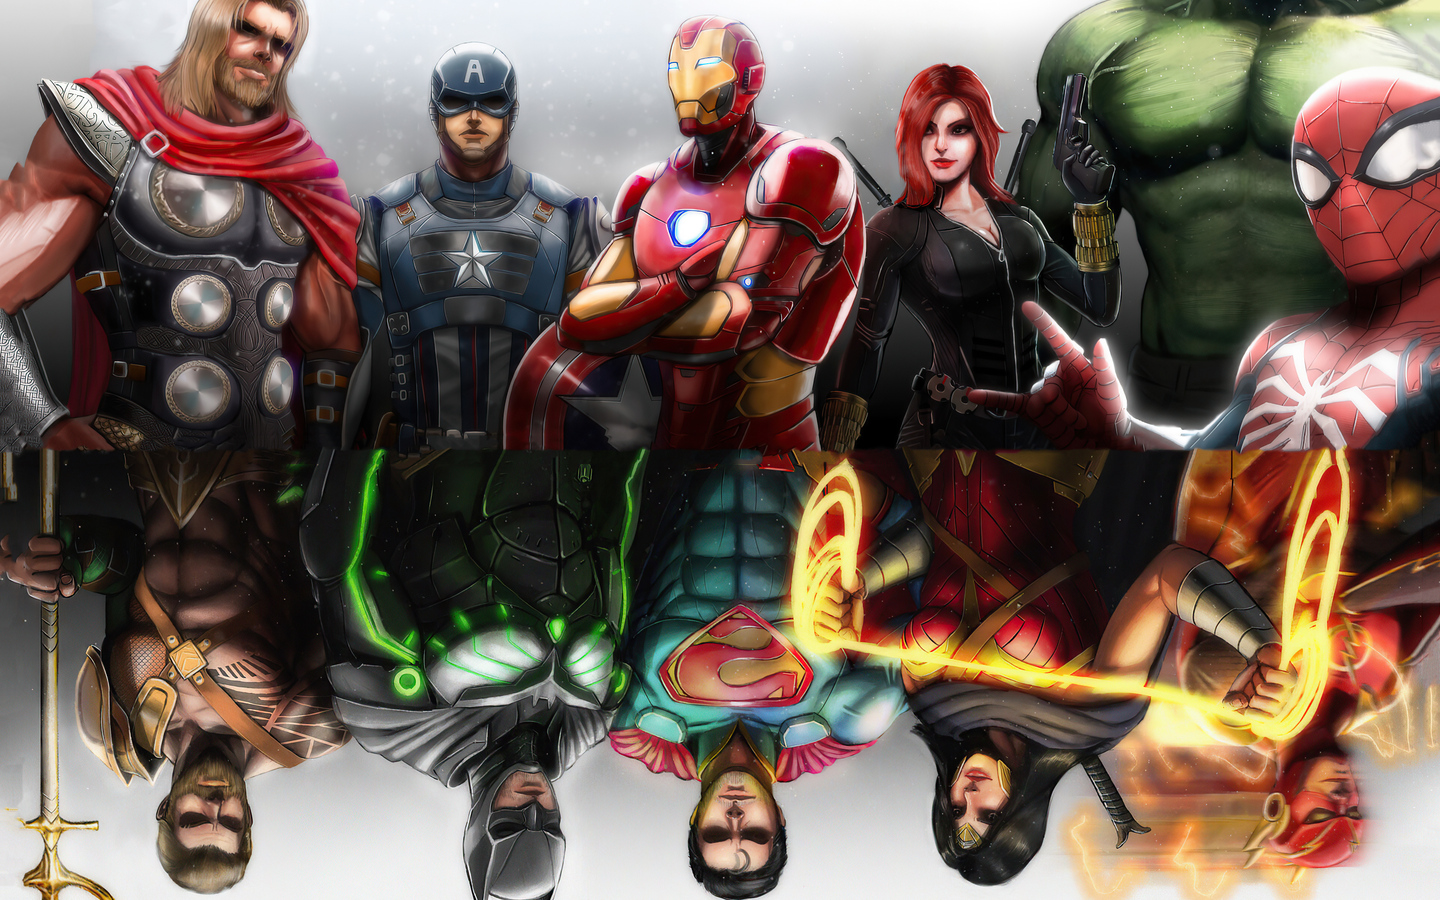 old-and-new-avengers-and-justice-league-6d.jpg